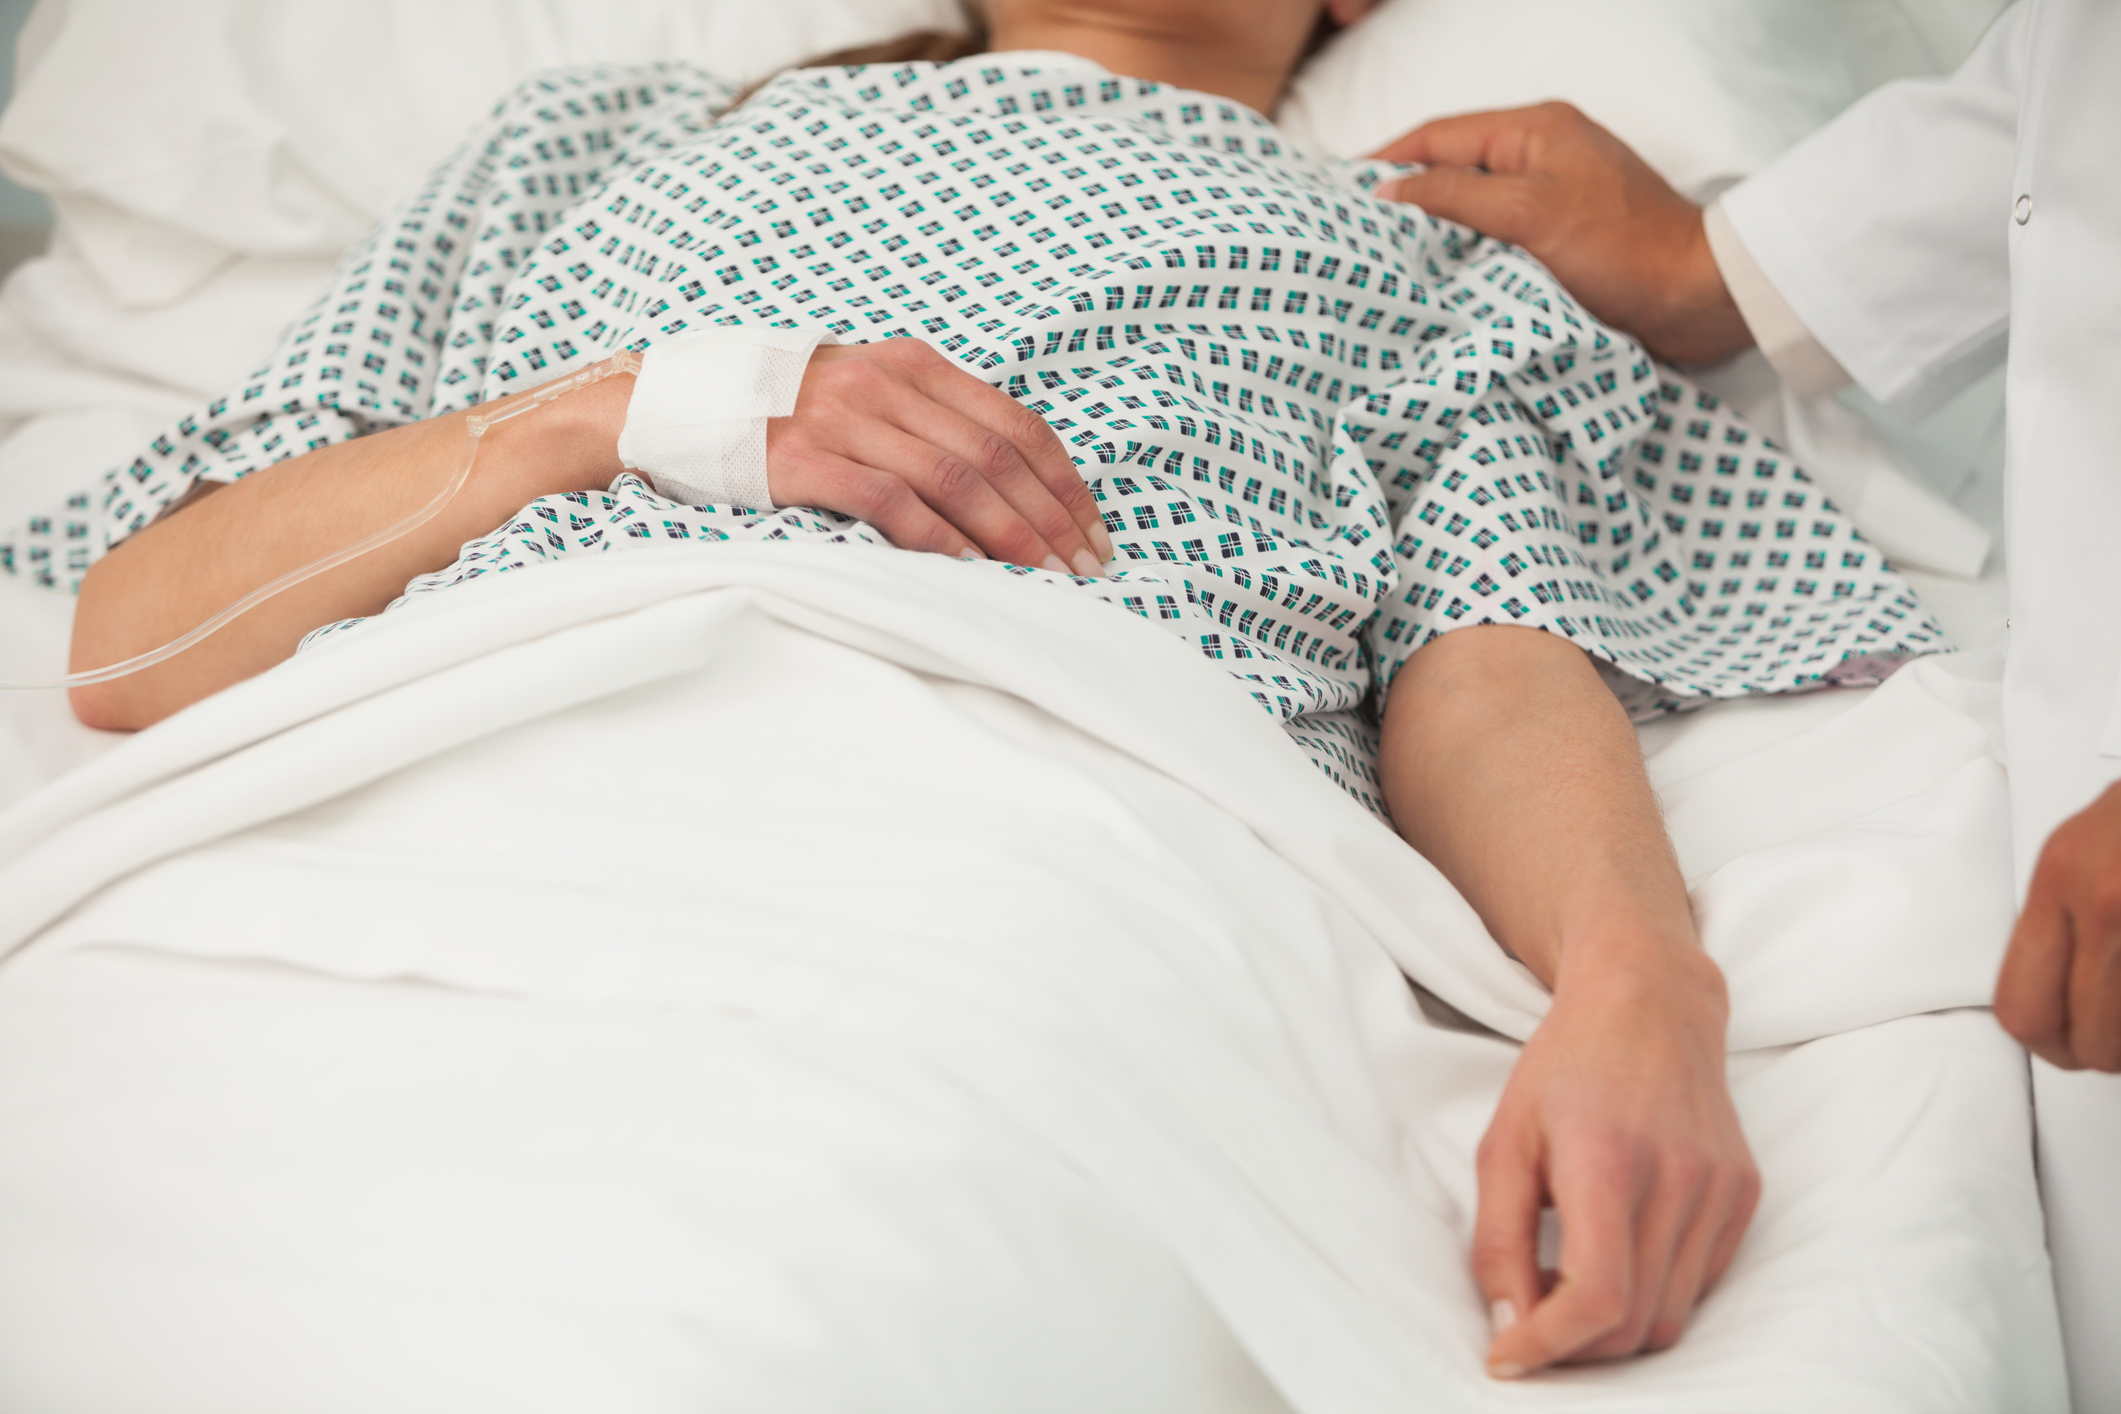 Palliative care improves quality of life in cancer patients